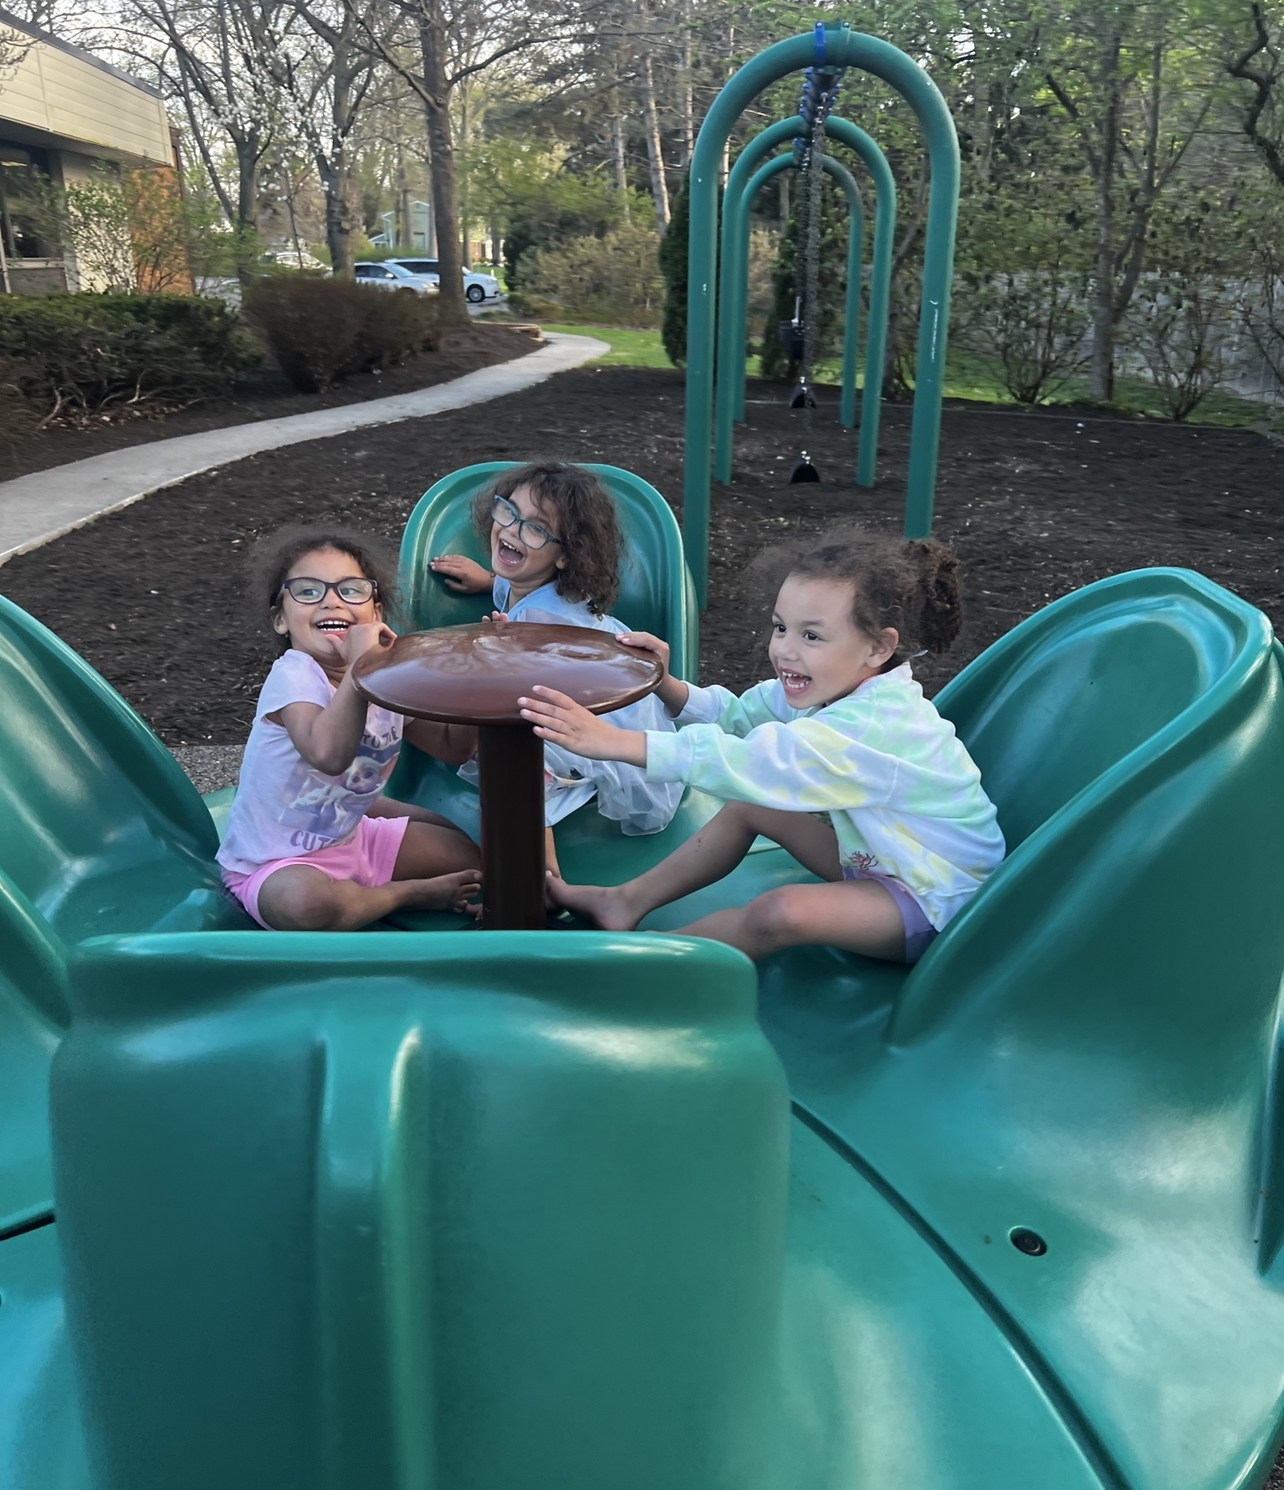 Discovering the Magic of Worthington’s All Children’s Playground: A Place Where Every Child Can Play